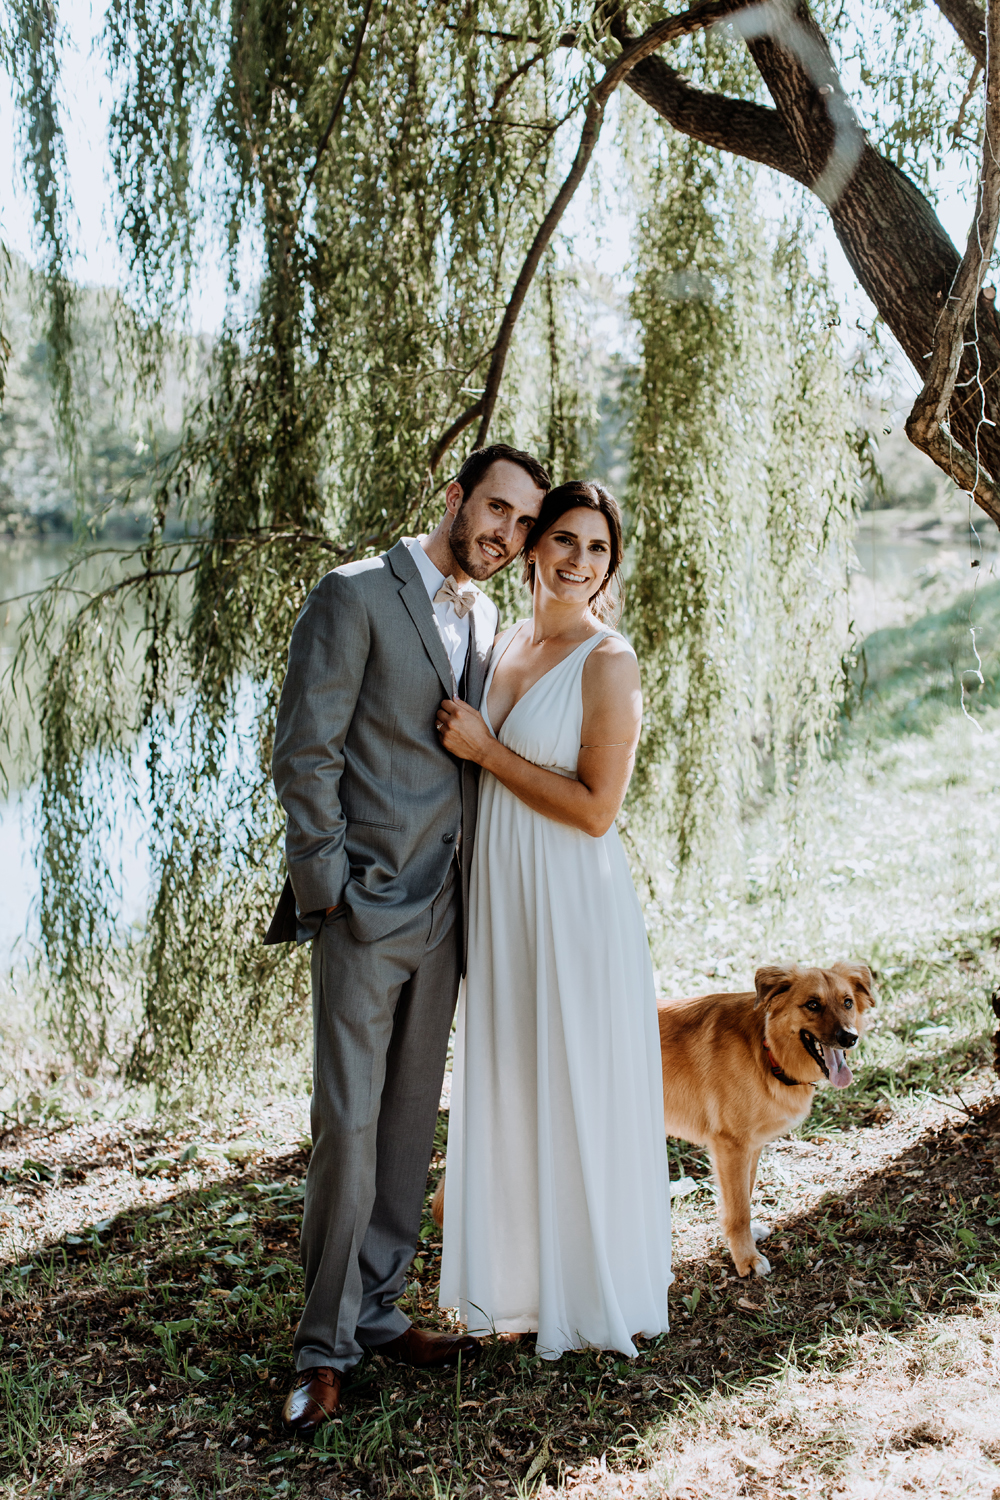 bride-and-groom-portrait-rustic-pennsylvania-wedding-photography-with-dog